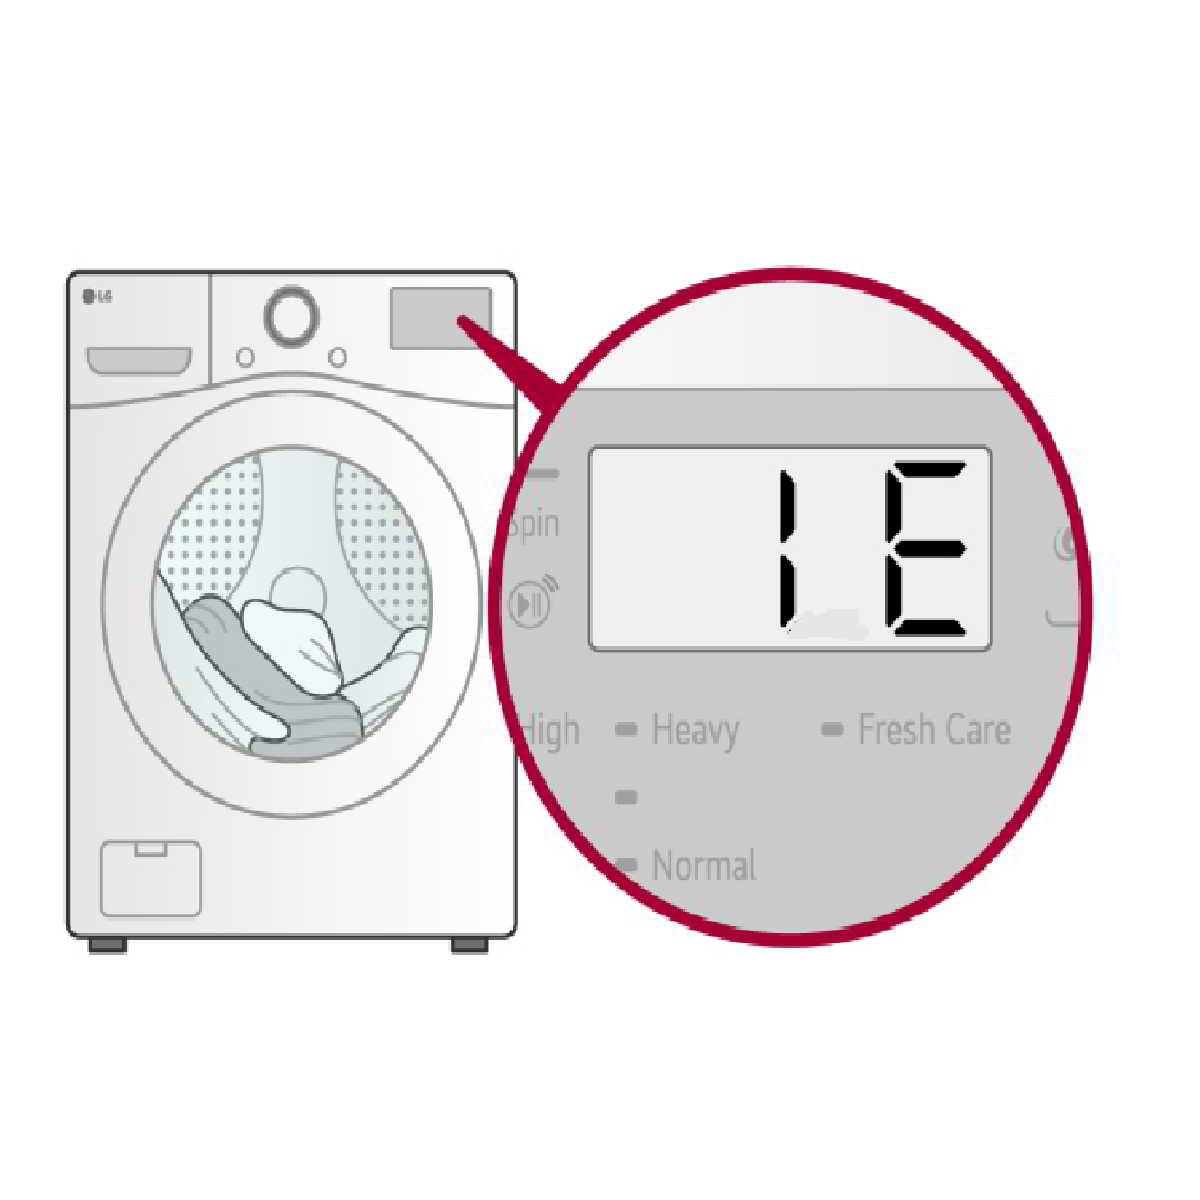 LG washer IE code during rinse cycle